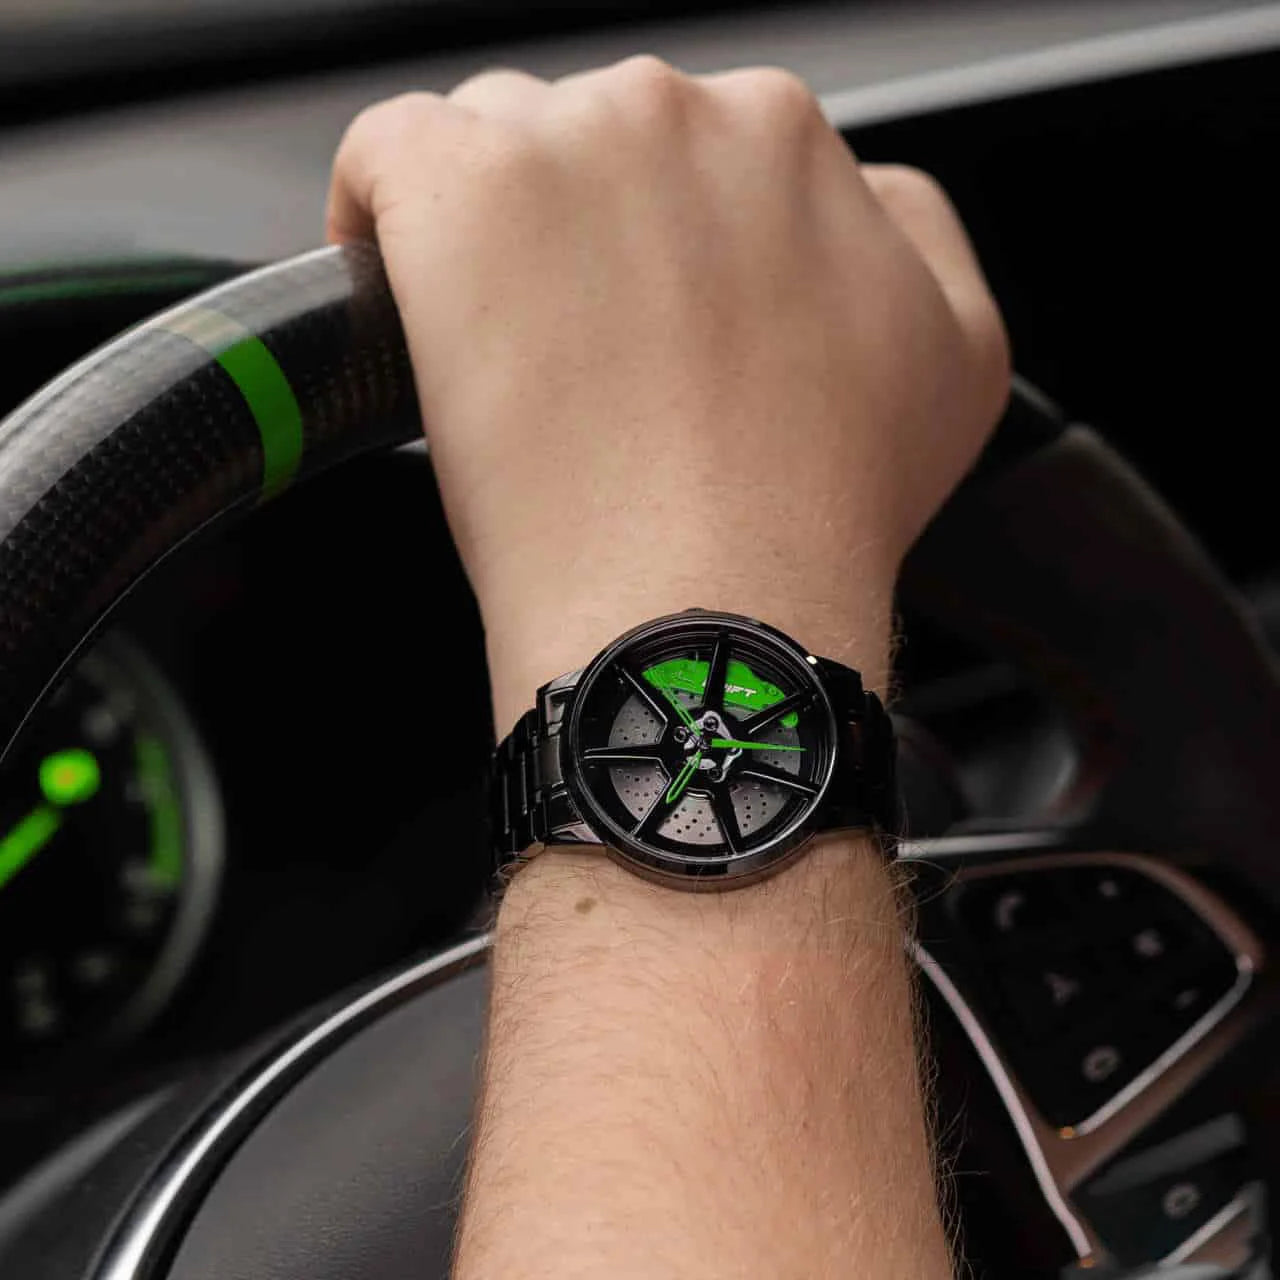 Revitalize your style with our green Drift Rim Watch! Designed by a German startup, these precision watches showcase pioneering design, designed to captivate motorsport, tuning, and auto aficionados. #id_46744374673738